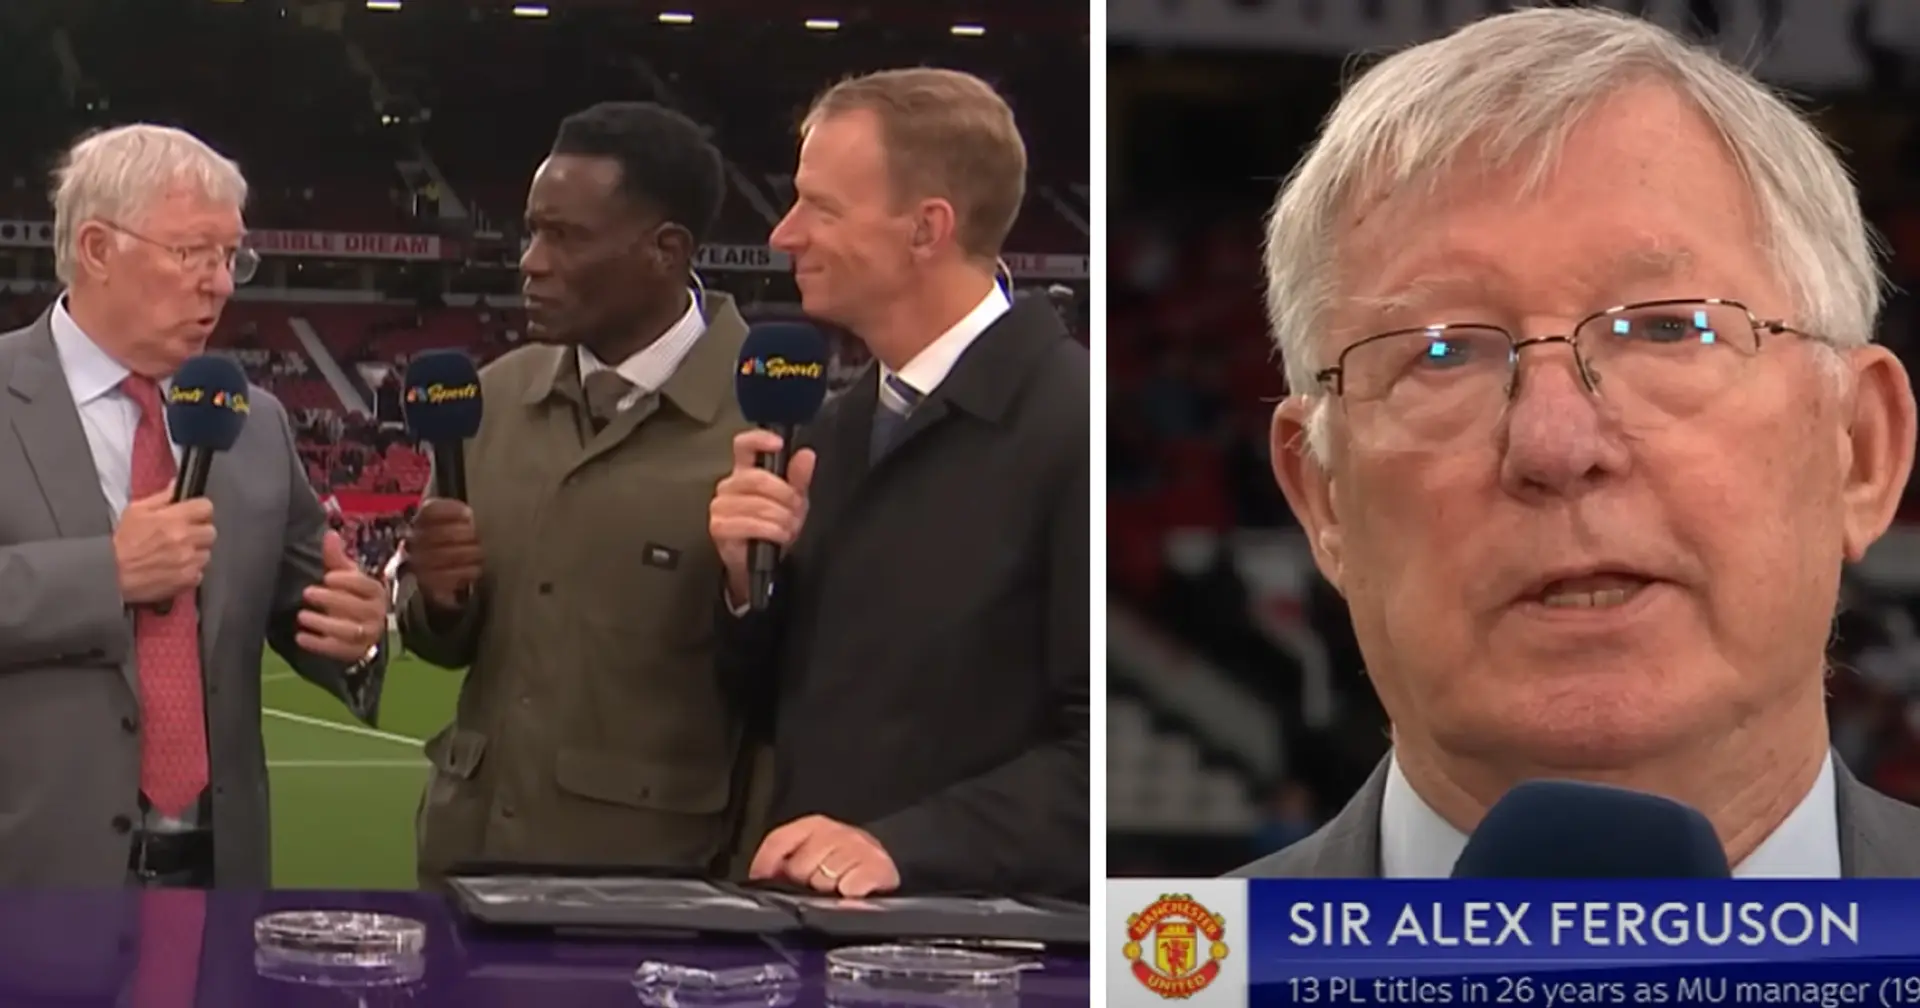 'I can't believe the scoreline': Sir Alex Ferguson names shocking team that surprised him on matchday 1